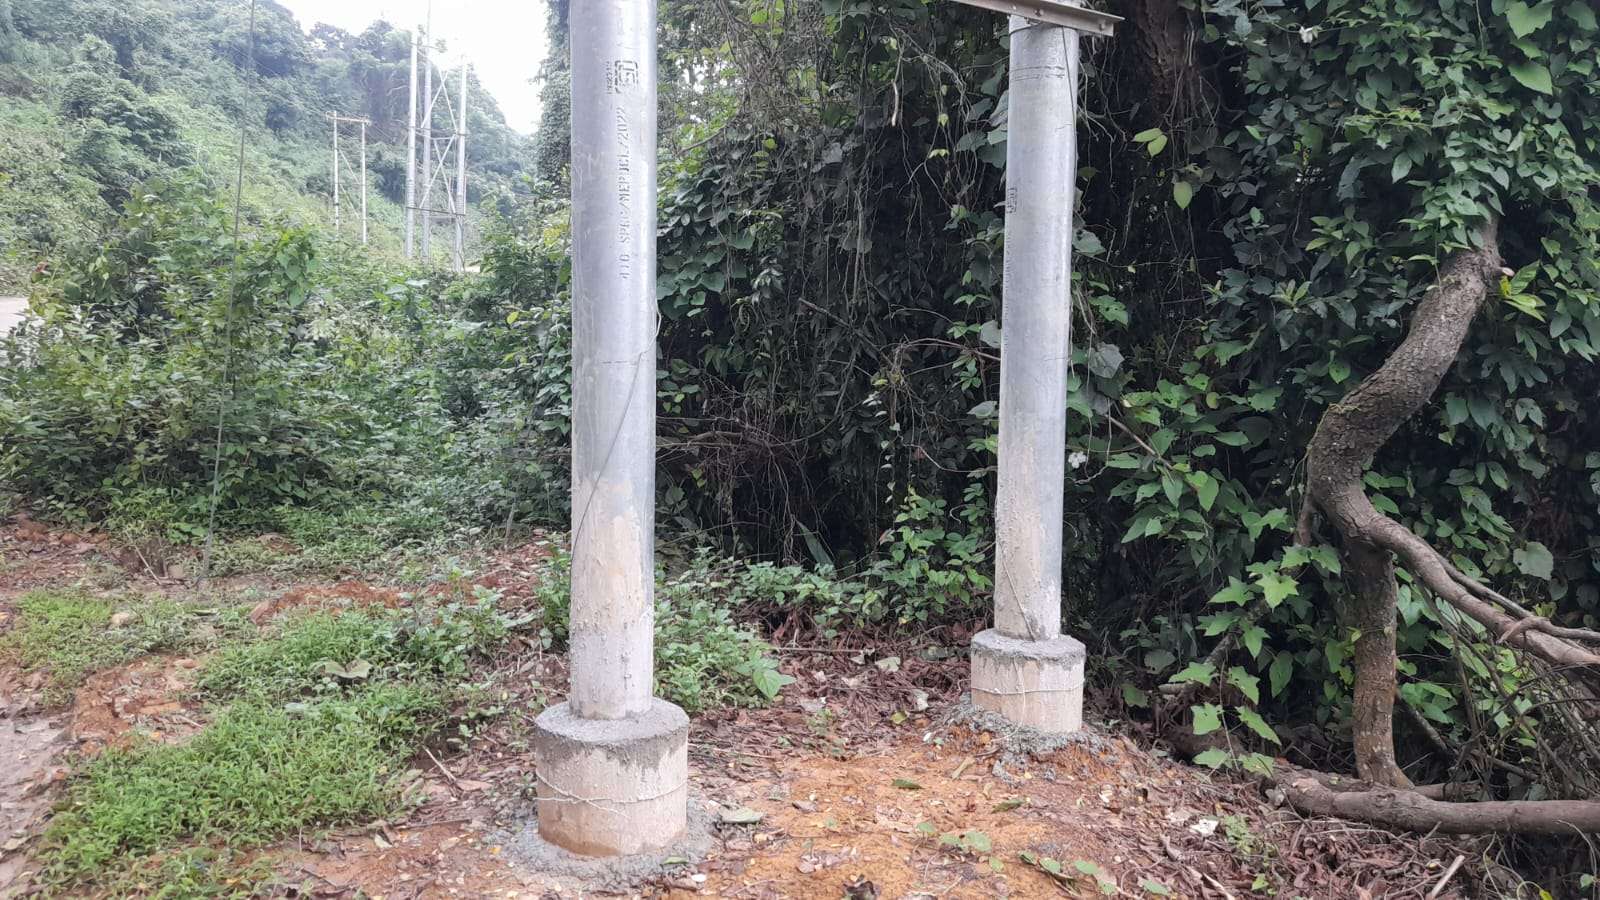 Substandard work on multi-crore project to set-up new posts & lines raises concerns in South Garo Hills